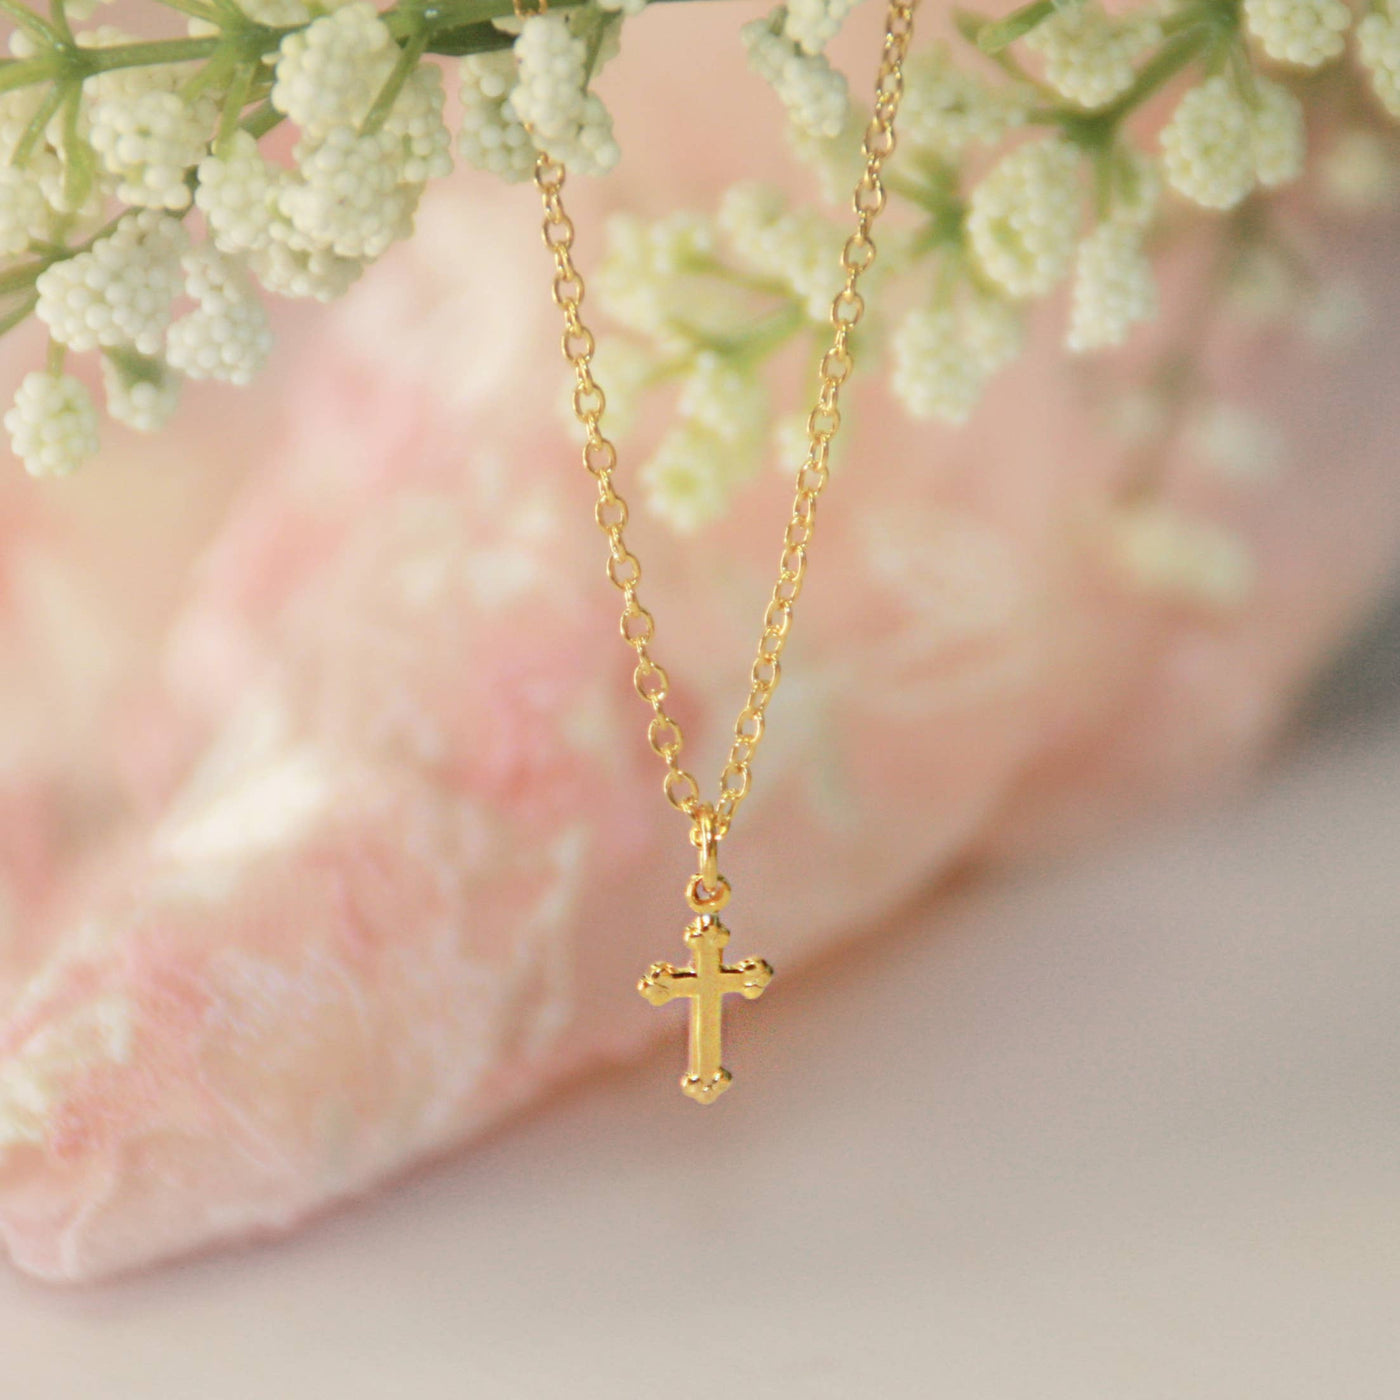 Collectables America - Classic Baby Cross Gold Necklace for every Order  CJ-300